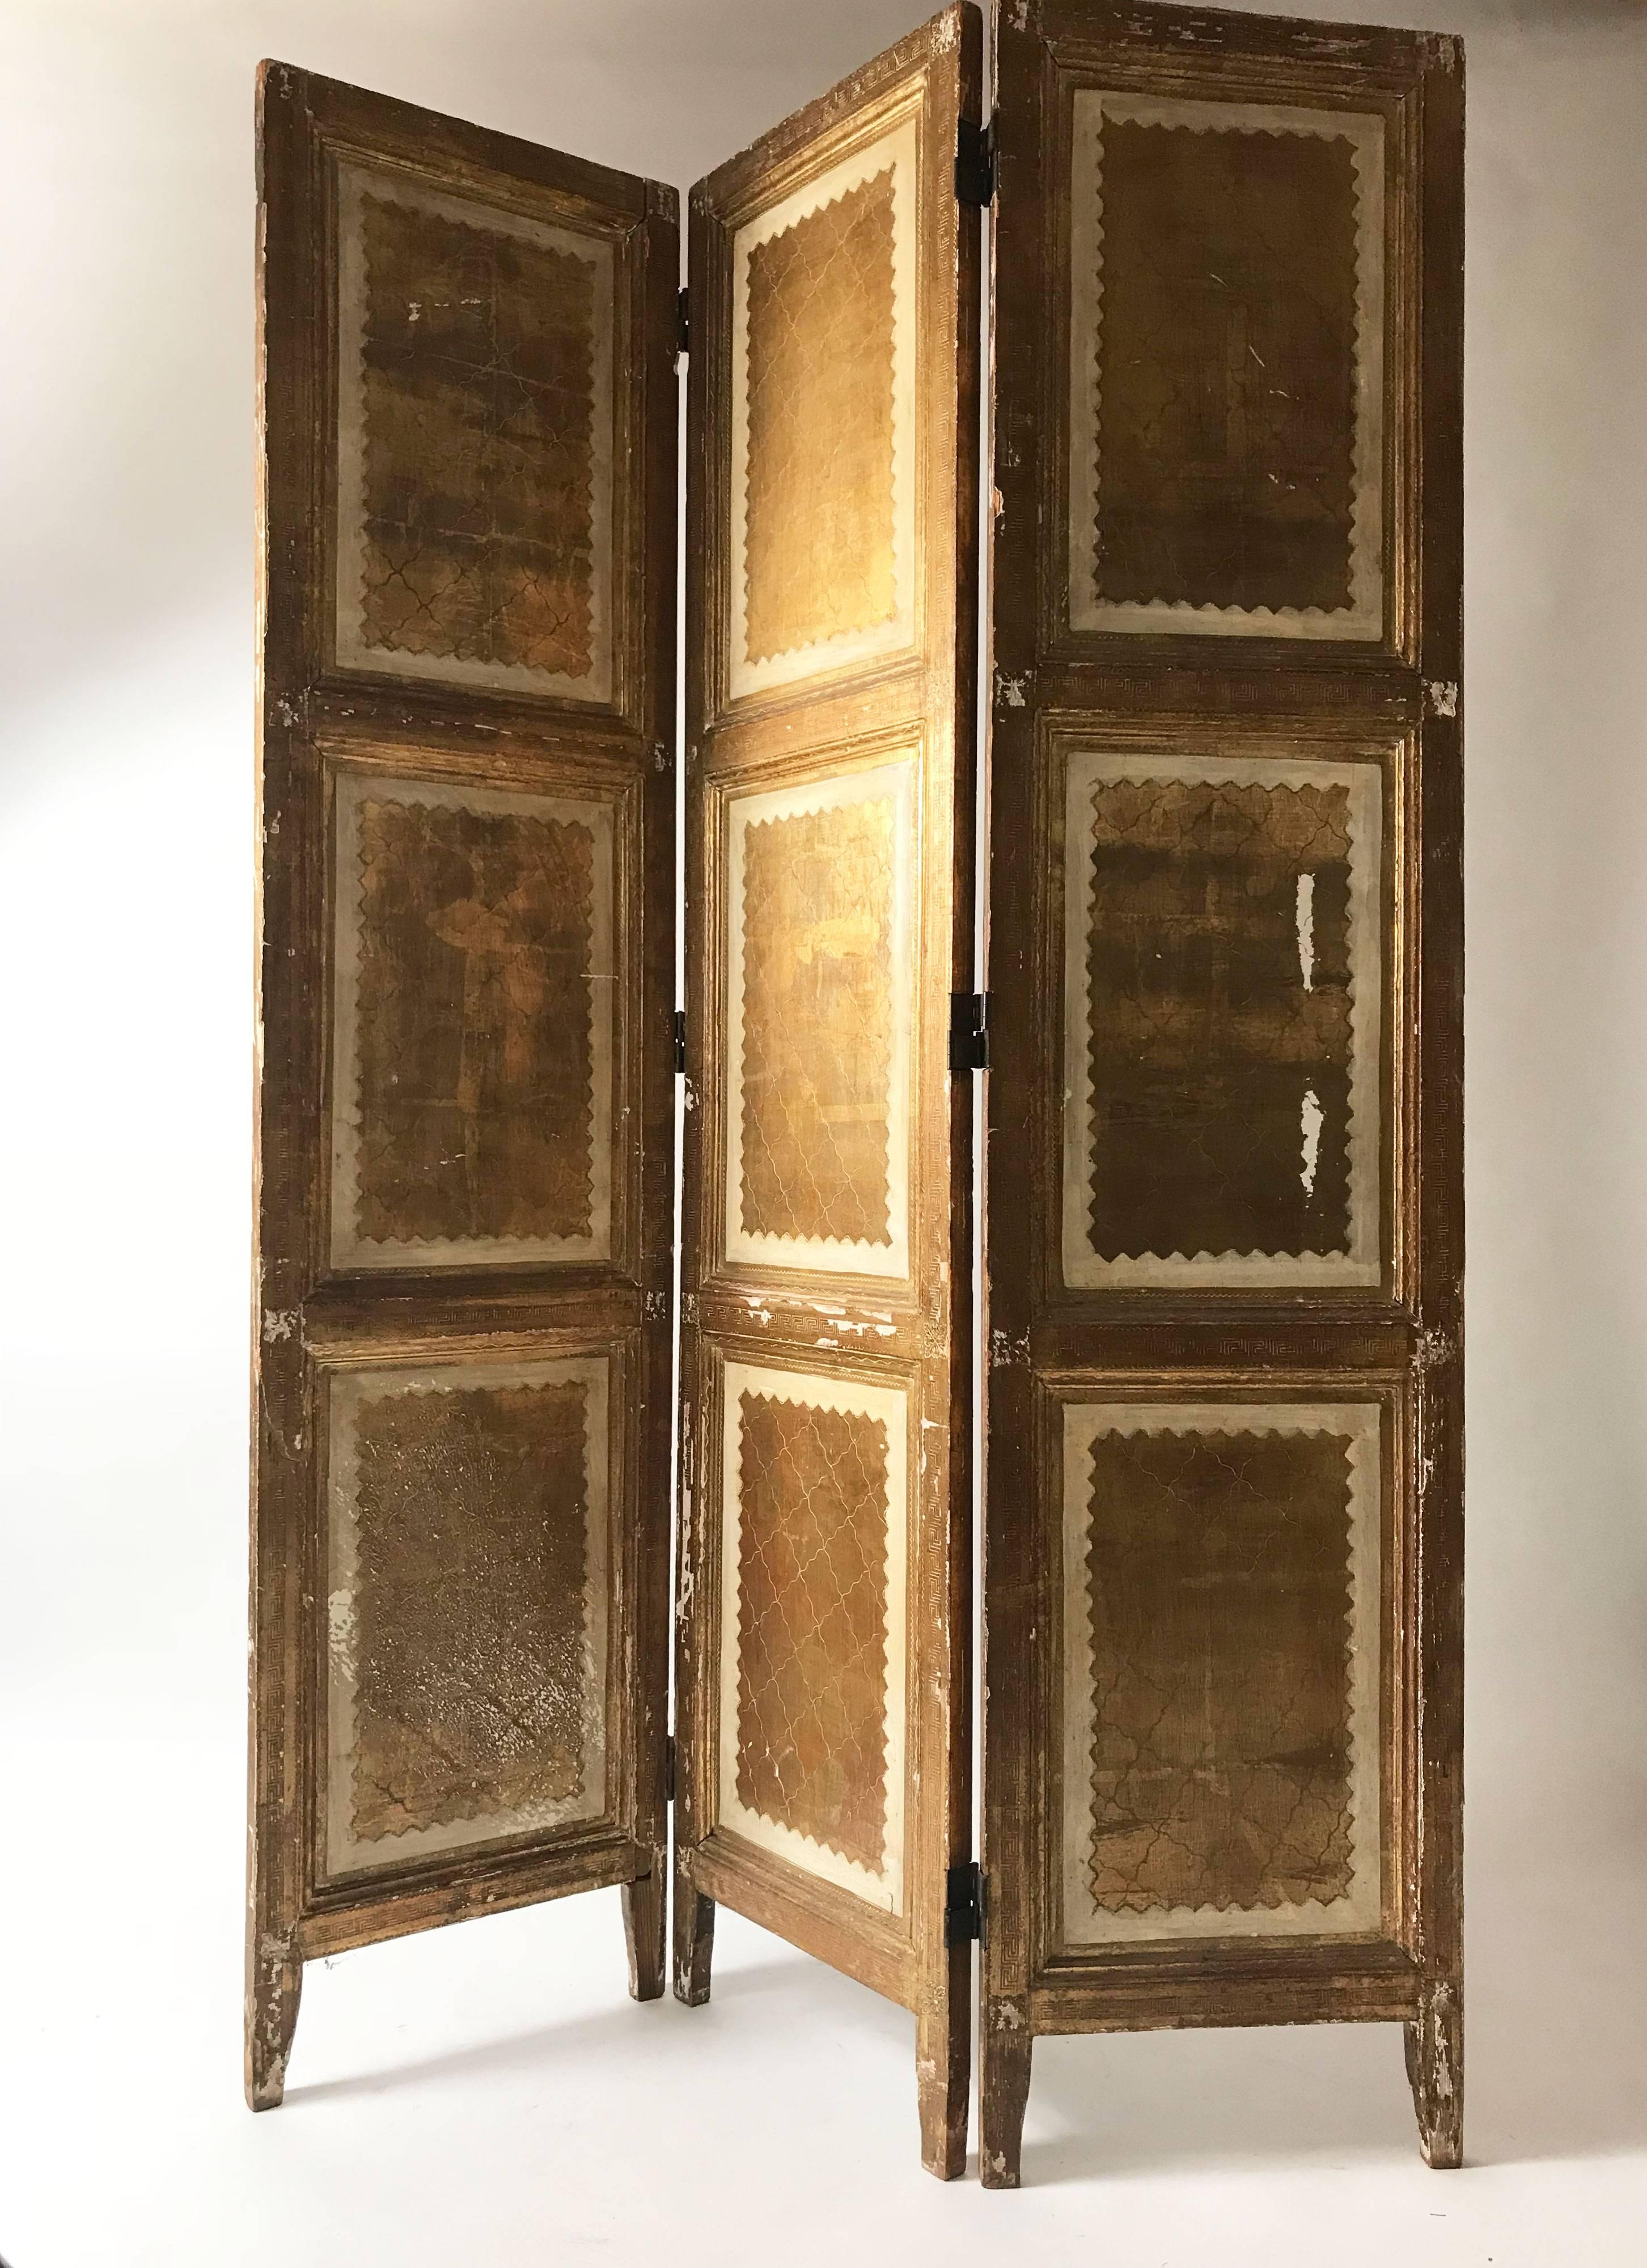 A very special Italian Florentine room divider or dressing screen. Gilded laurel motifs on a cream background. Significant wear to one of the panels but in general the patina only adds to the vintage feel. Three panels. Made in Italy.